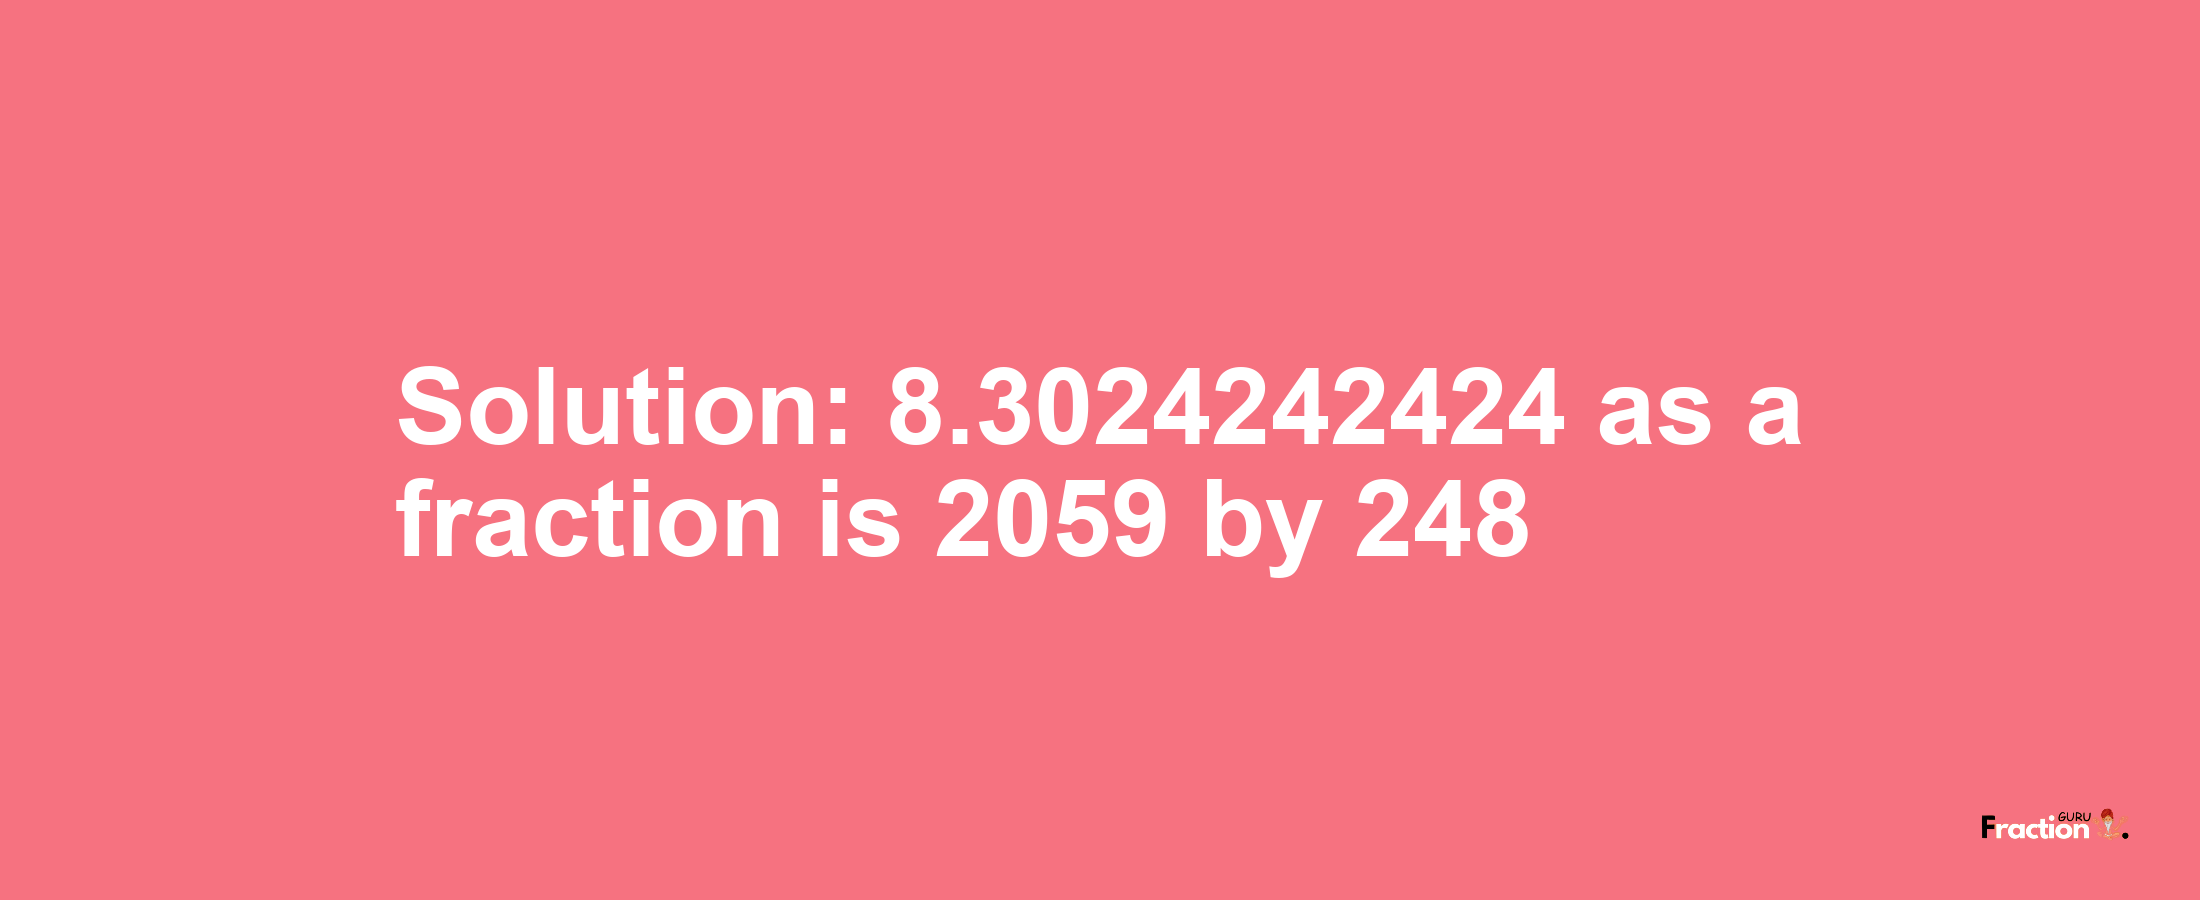 Solution:8.3024242424 as a fraction is 2059/248